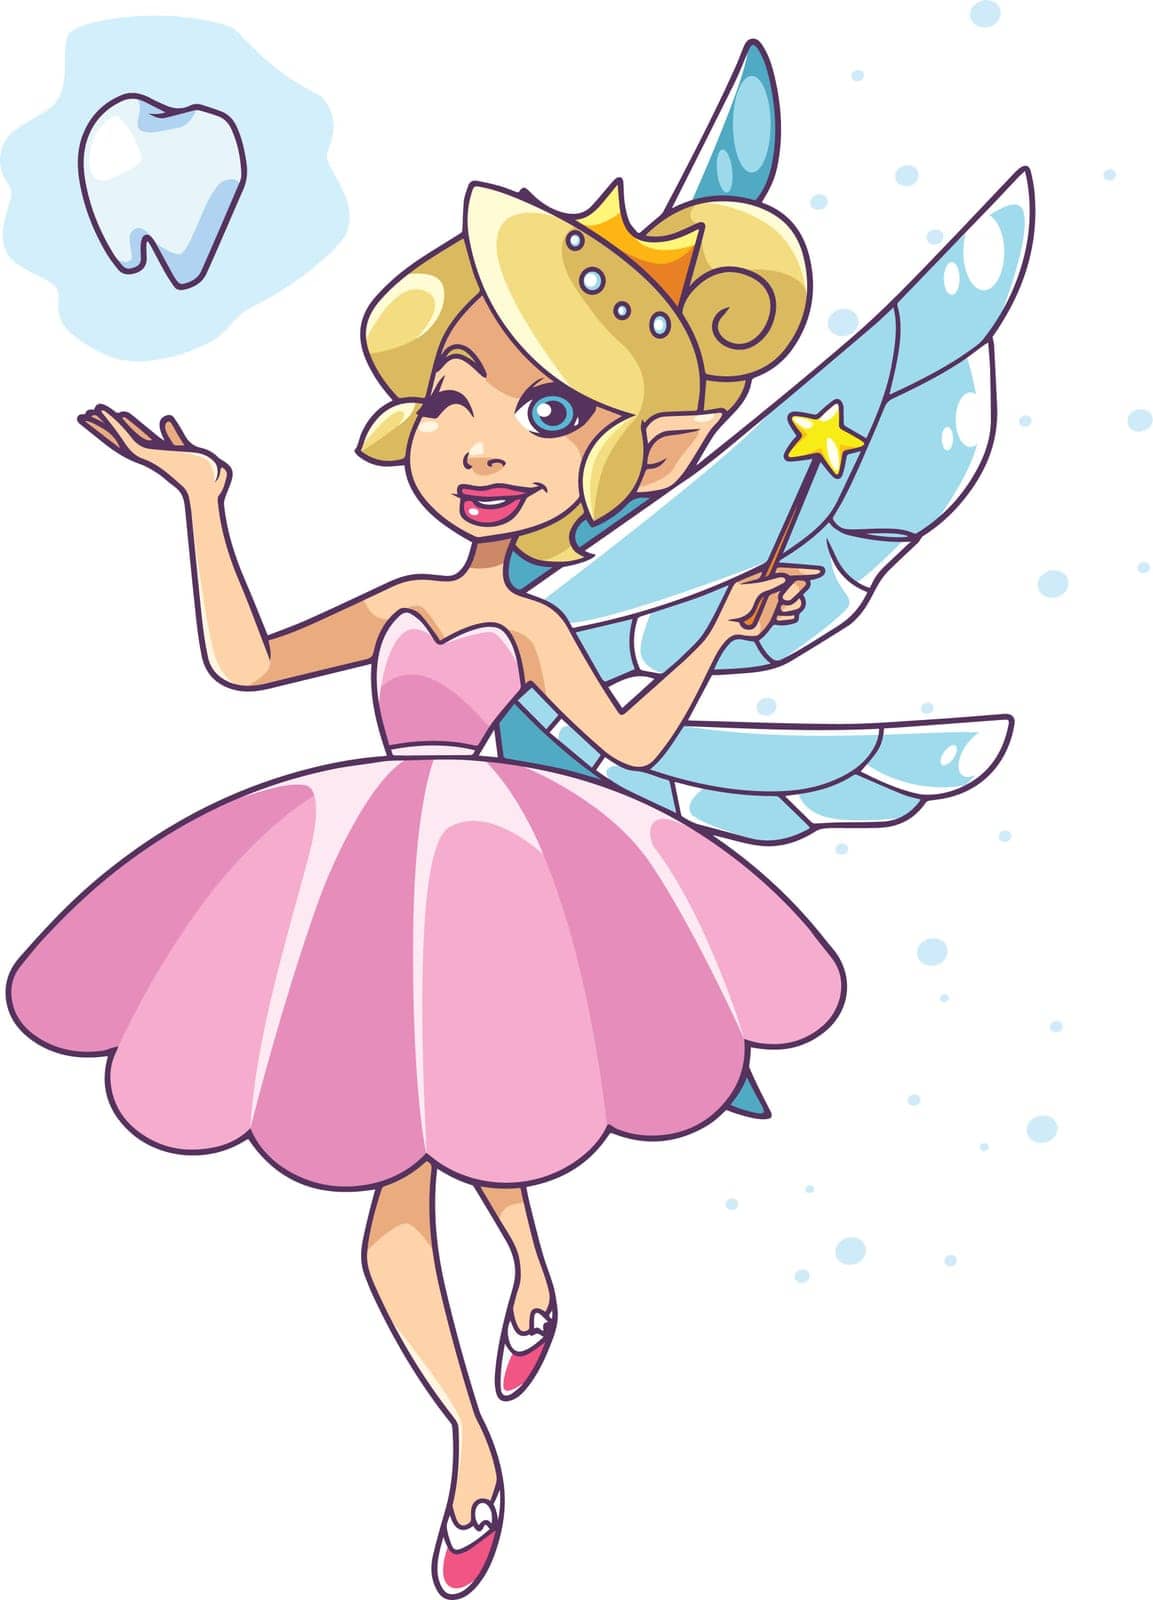 Tooth Fairy on White by Malchev